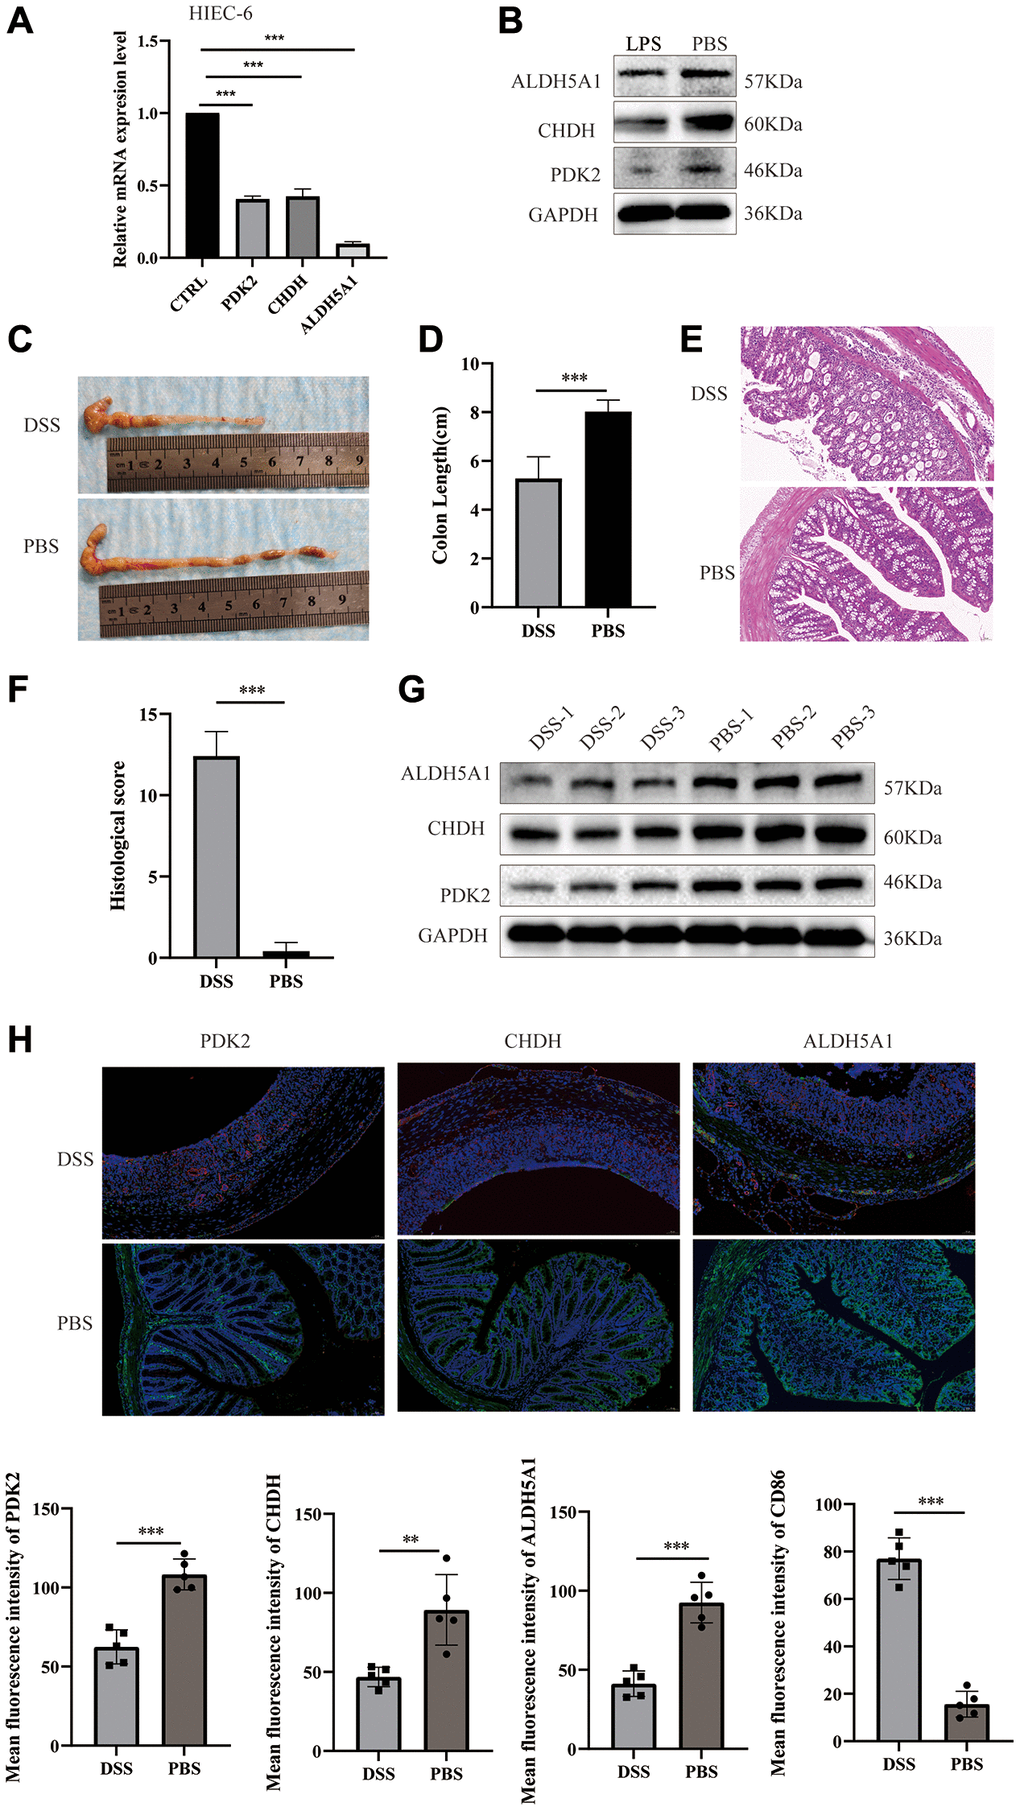 Expression of PDK2, CHDH, and ALDH5A1 in LPS-induced HIEC-6 cells and DSS-induced colitis mice. The relative mRNA (A) and protein (B) expression levels of PDK2, CHDH, and ALDH5A1 were conducted using the LPS-induced HIEC-6 cells. (C) Photographs were utilized to assess the variations in colon lengths among the groups. (D) The length of the colon in different groups. (E, F) Hematoxylin and eosin staining images and colonic histological scores of colon cross-sections in mice (n = 5). Scale bar = 50 μm. (G) Expression of PDK2, CHDH, and ALDH5A1 in the colon tissues of mice was detected using Western blotting. (H) Double immunofluorescence staining of PDK2 (labeled in green), CHDH (labeled in green), and ALDH5A1 (labeled in green) with M1 macrophages (CD86, labeled in red) at DSS induced mice. The nuclei were stained by DAPI (blue). n = 5 per group. Scale bar = 50 μm. Values are expressed as the mean ± sd (n = 5). *P **P ***P 